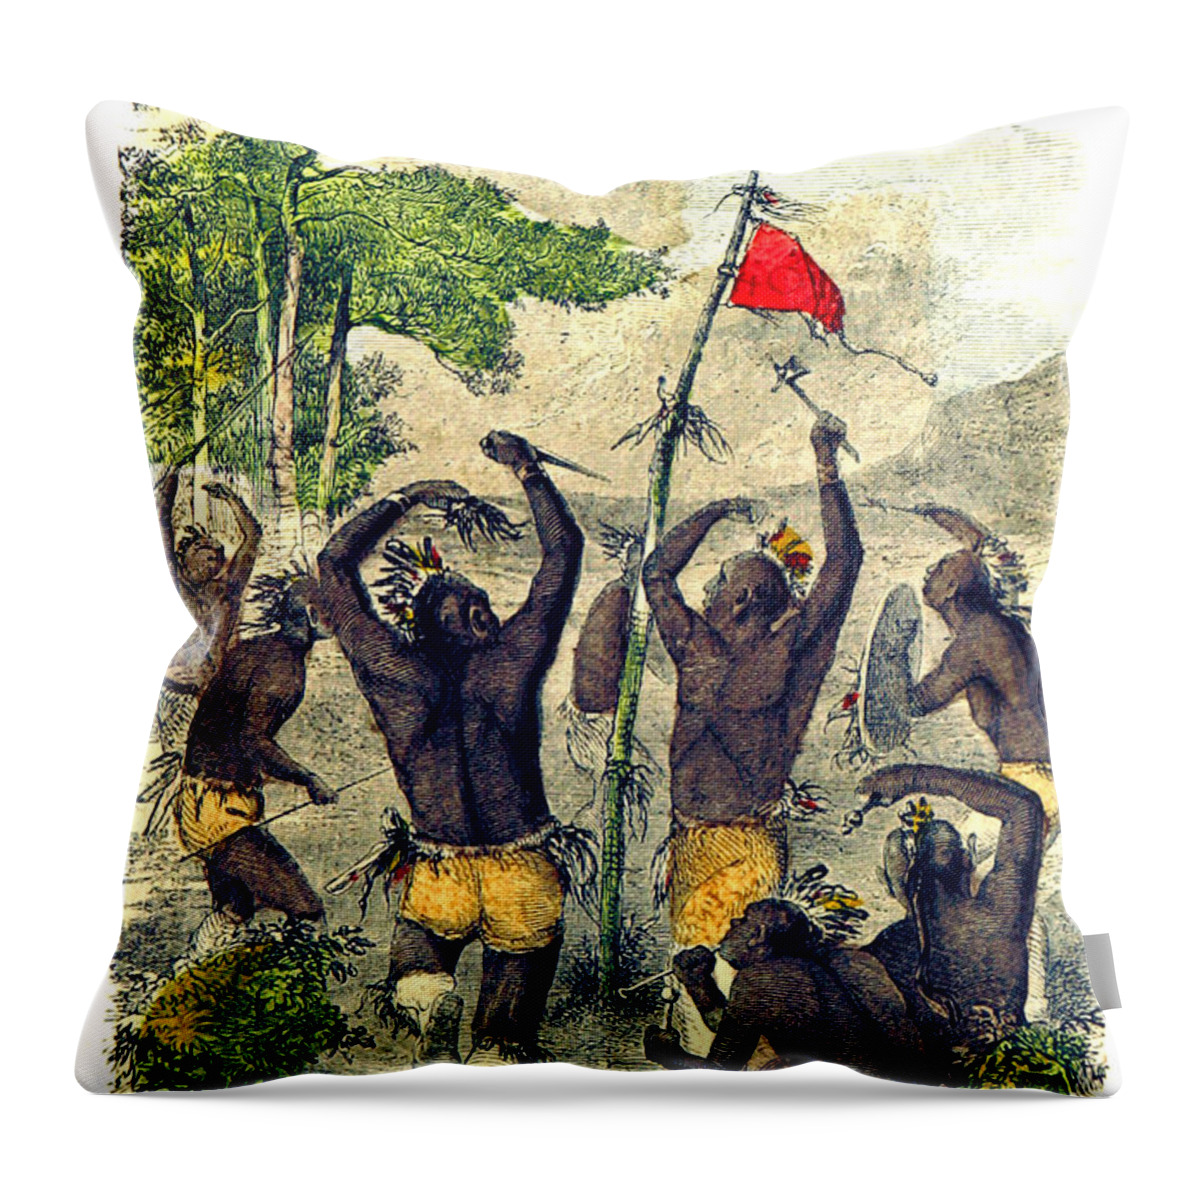 Religion Throw Pillow featuring the photograph Native American Indian War Dance by British Library